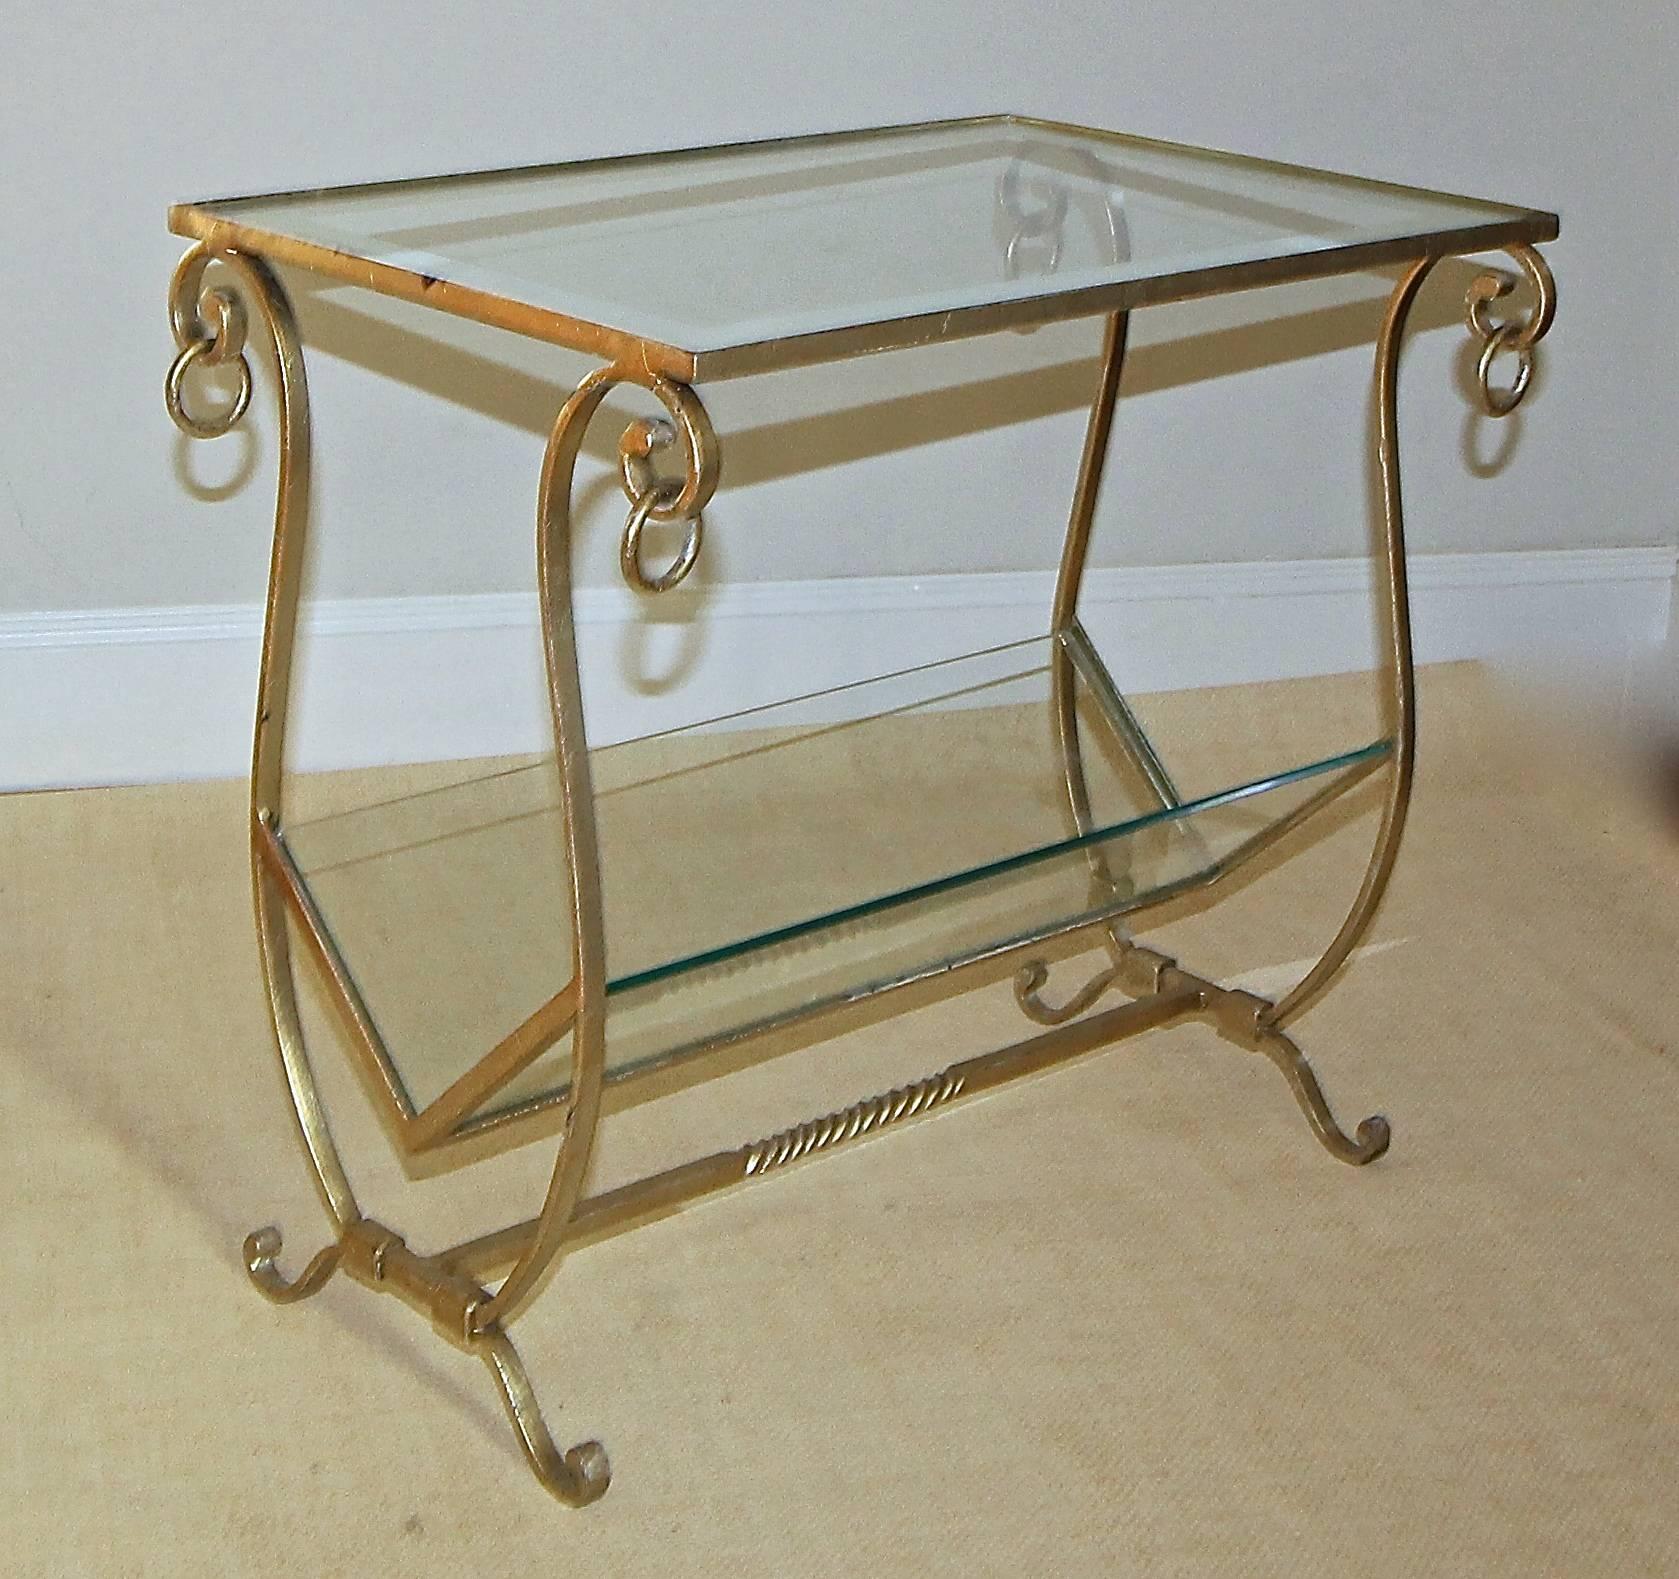 A fine gilt iron side table with lower shelf magazine self. Inset glass top has a mirrored edge. Lower magazine shelf with clear glass.